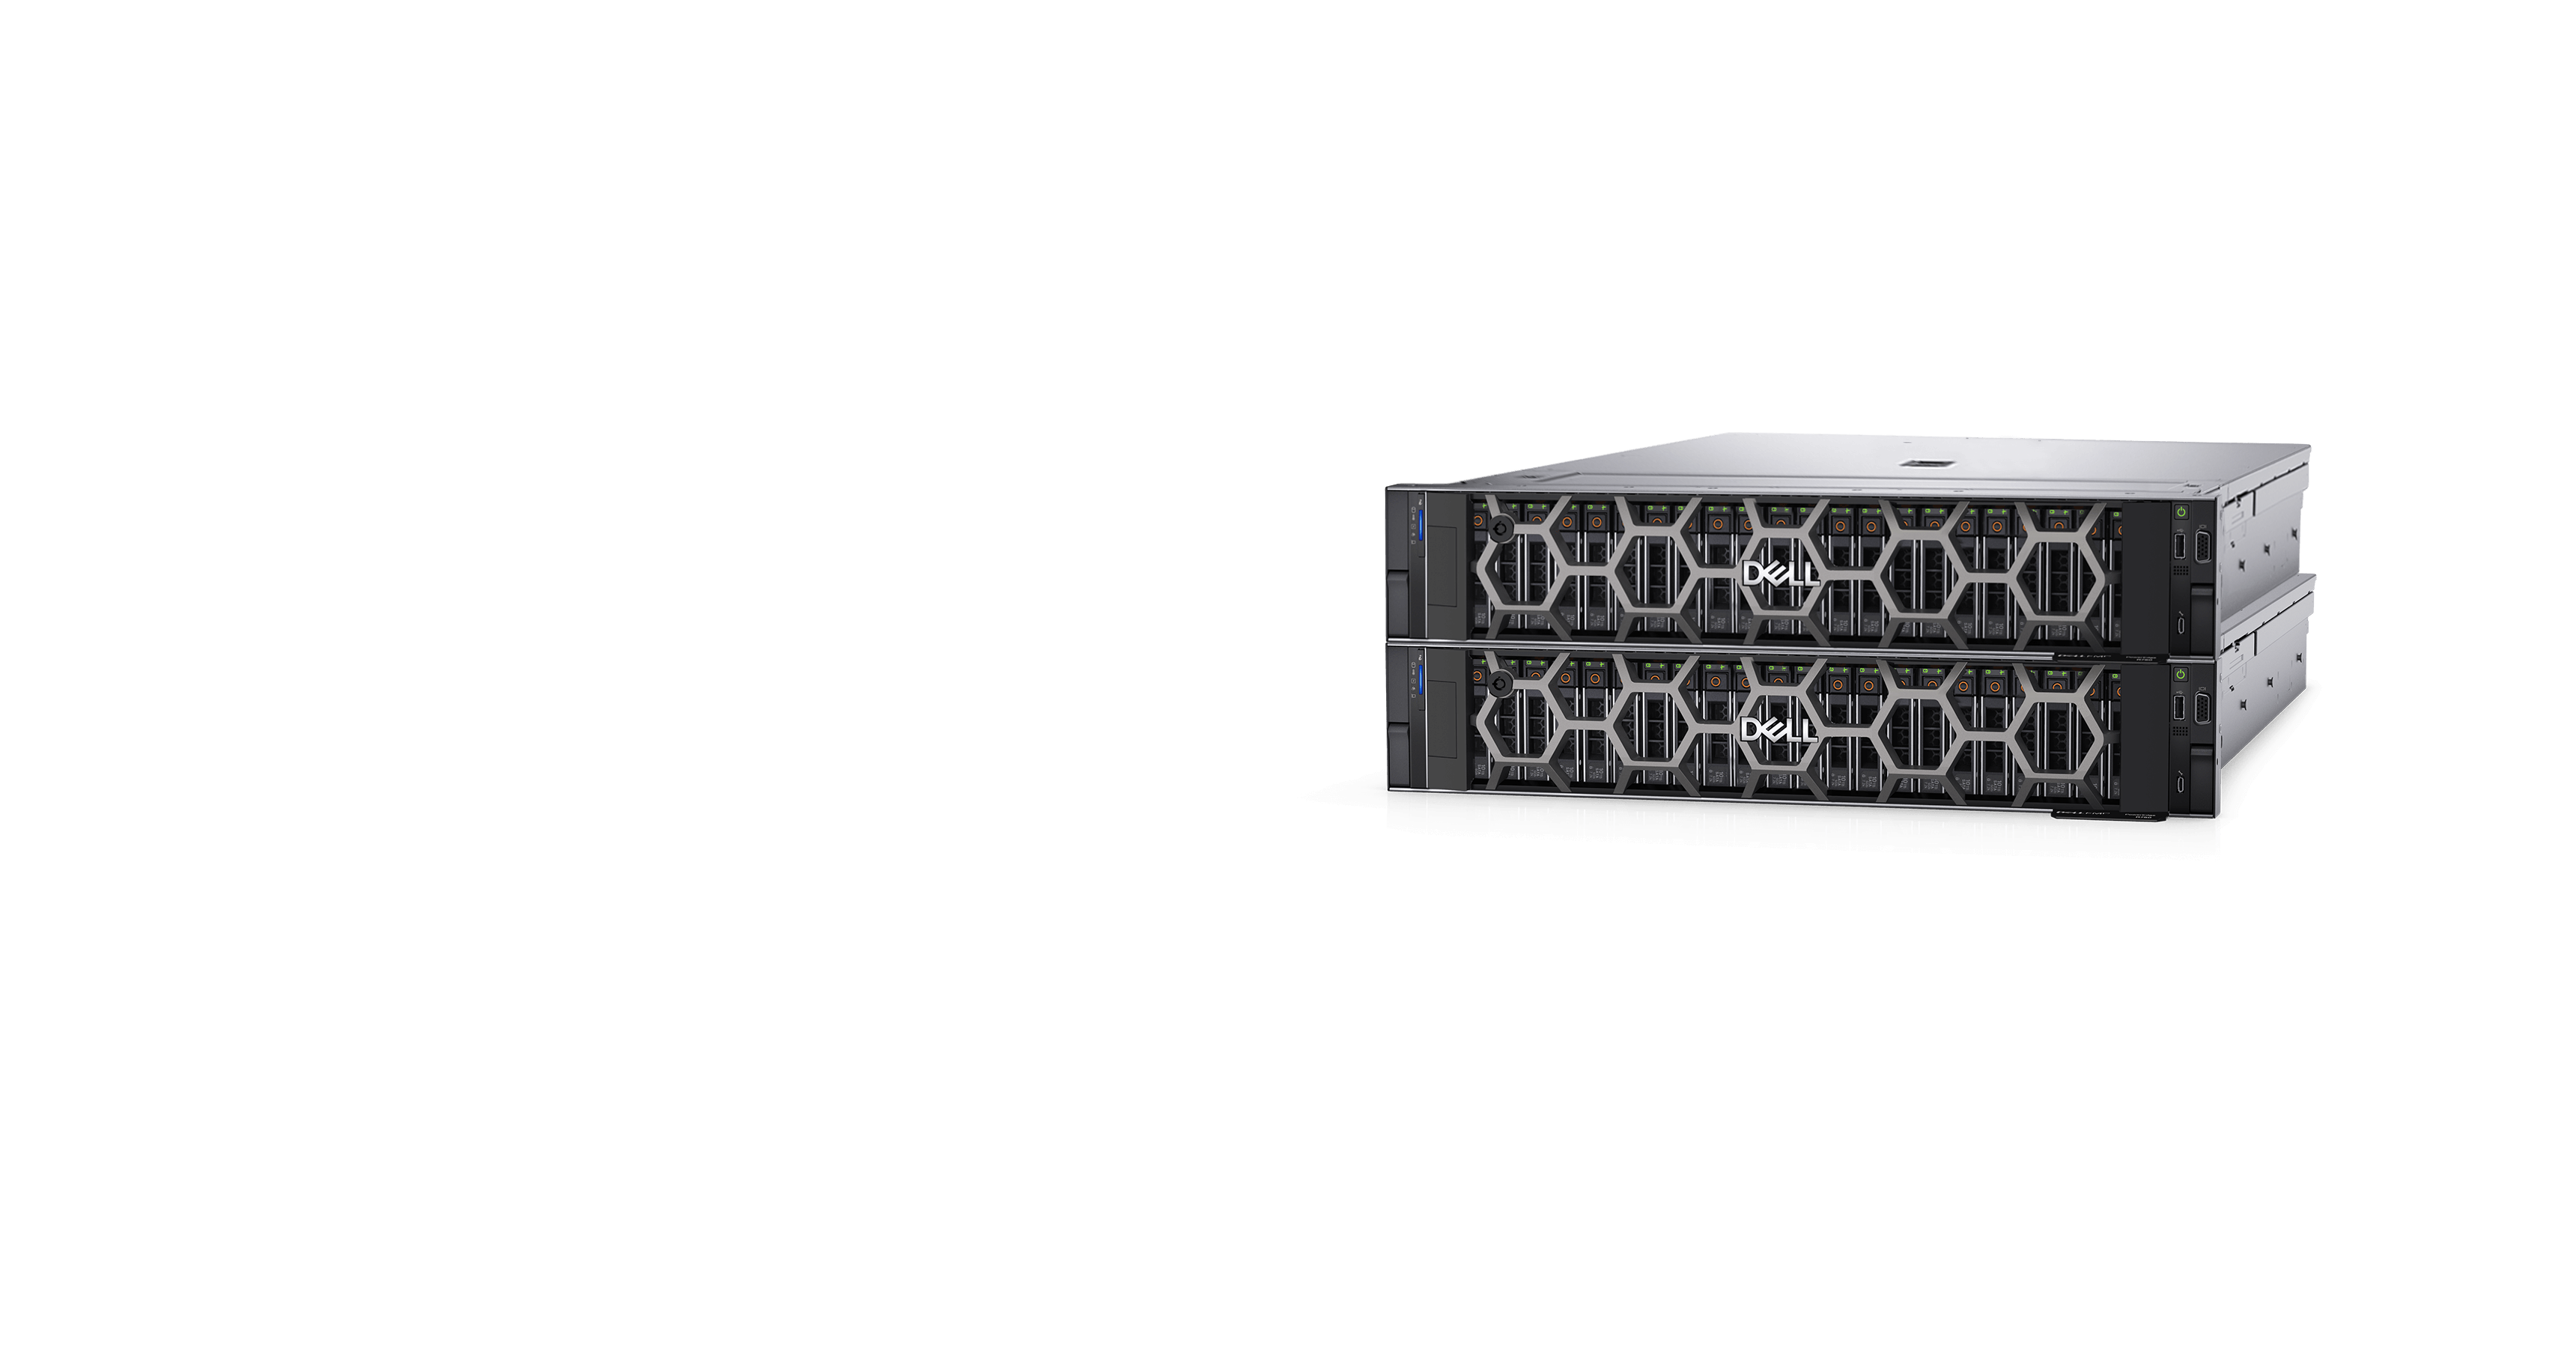 https://i.dell.com/sites/csimages/Banner_Imagery/all/dell-servers-category-hero-poweredge-r750-lf-3440x1800.png